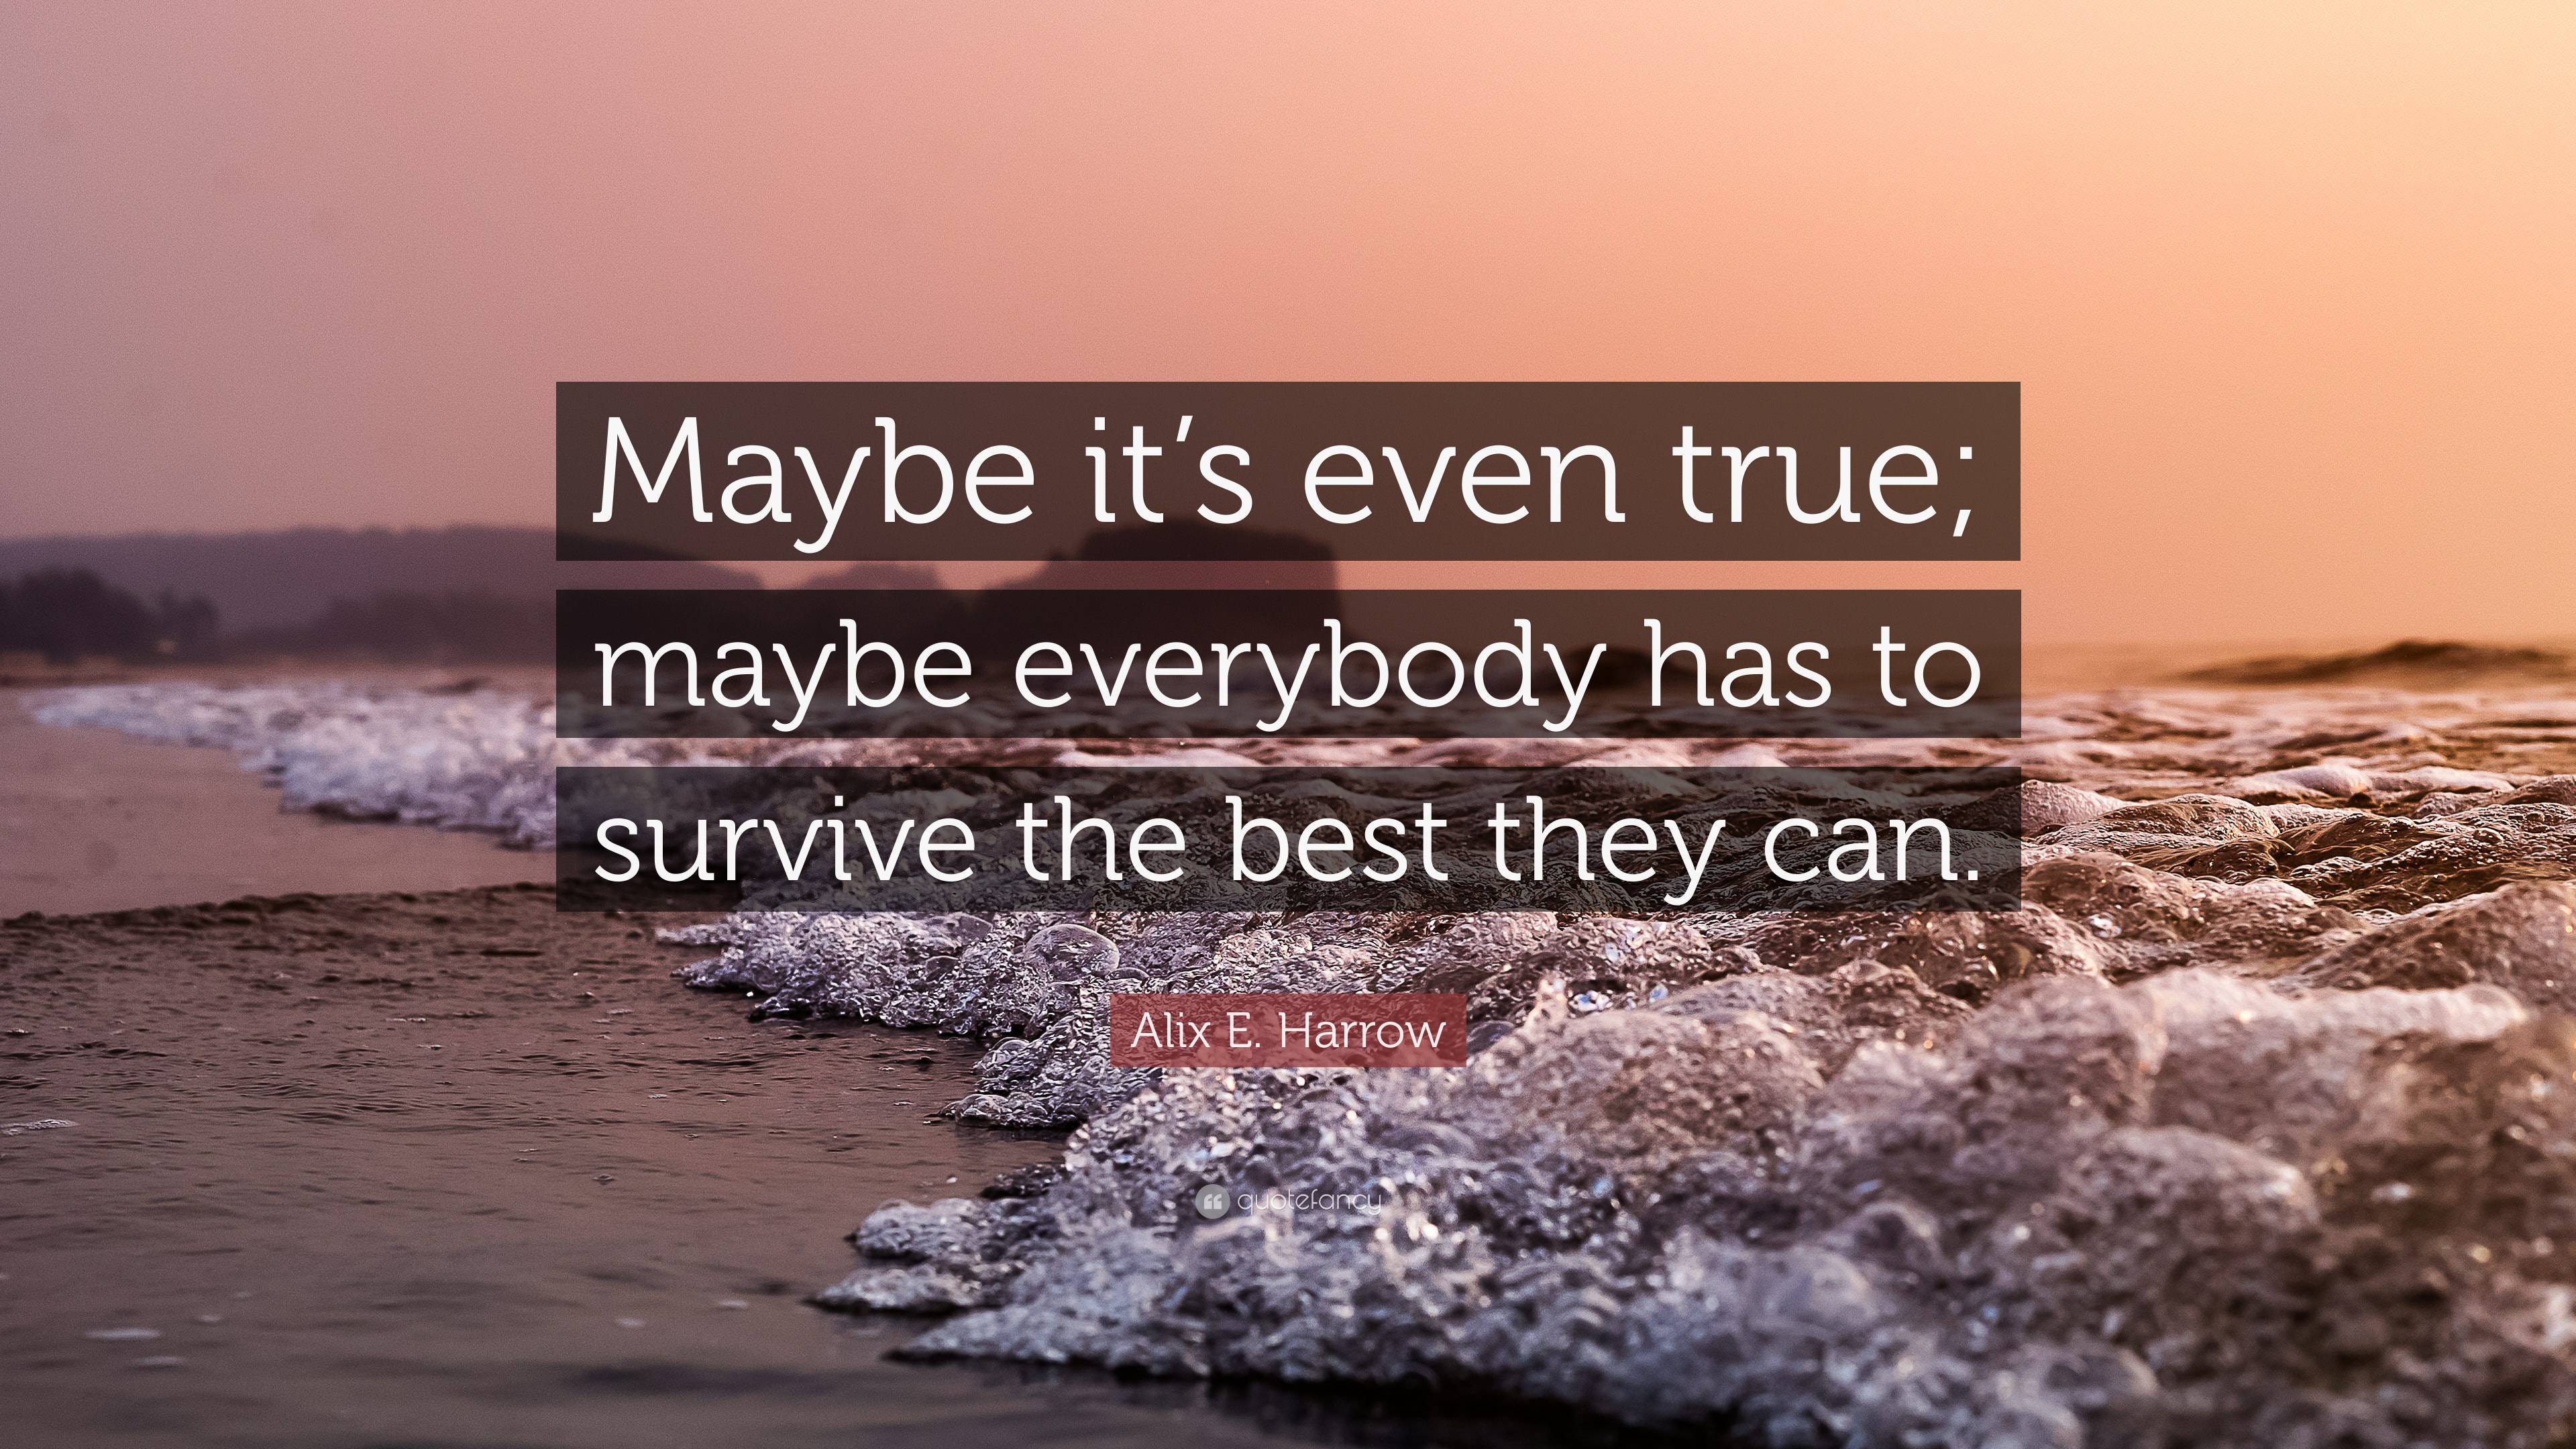 Alix E. Harrow Quote: “Maybe it’s even true; maybe everybody has to ...